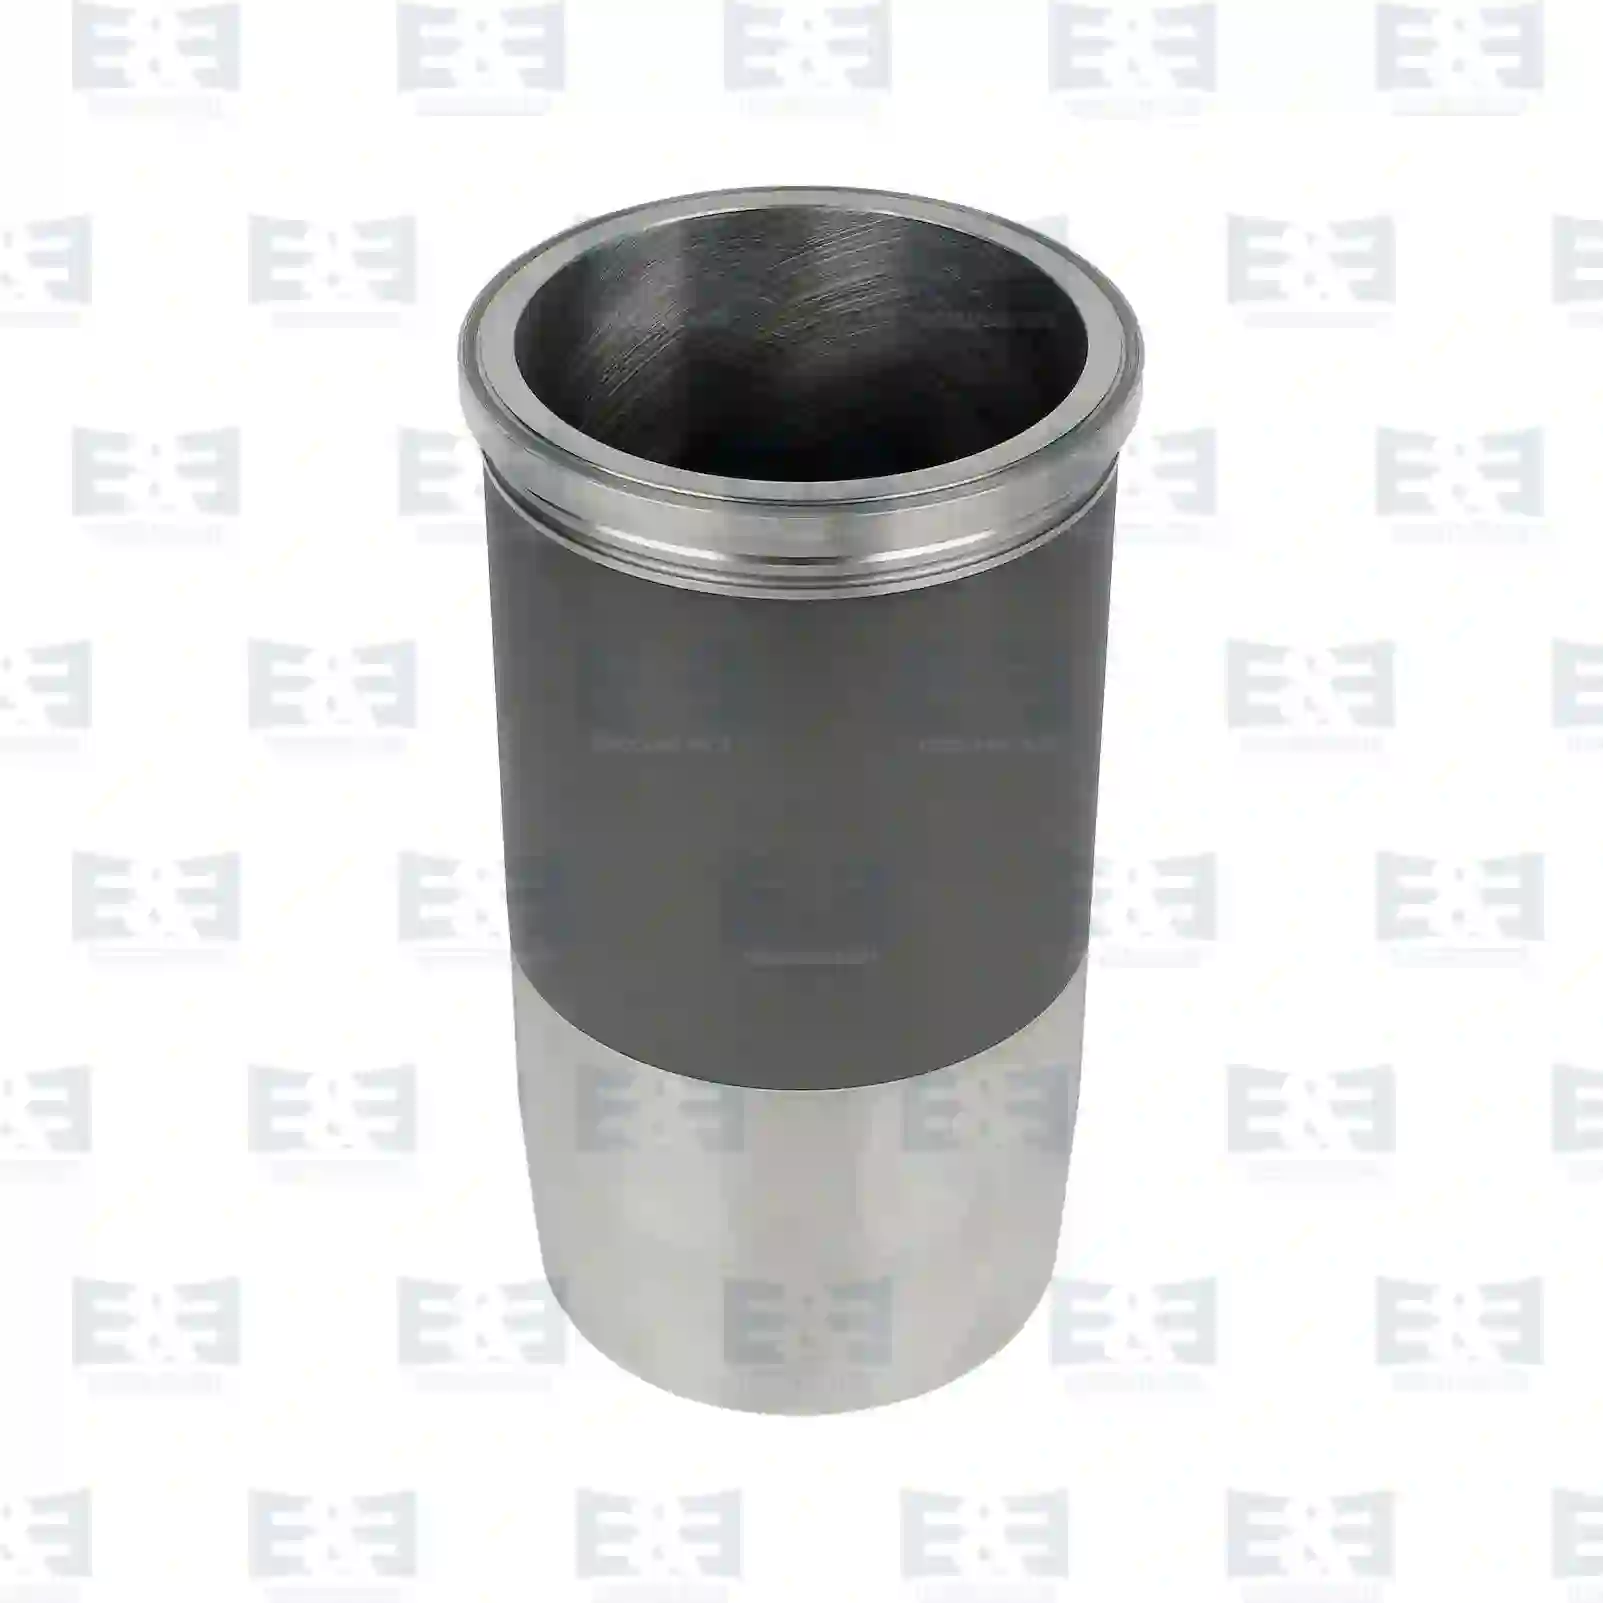 Cylinder liner, without seal rings, 2E2209983, 51012010265, 51012010309, 51012010372, 51012010385, 51012010391, 51012010398, 51012010403, 51012010404, 51012010432, 51012010468, 51025017556, 51025017570, 51025017571 ||  2E2209983 E&E Truck Spare Parts | Truck Spare Parts, Auotomotive Spare Parts Cylinder liner, without seal rings, 2E2209983, 51012010265, 51012010309, 51012010372, 51012010385, 51012010391, 51012010398, 51012010403, 51012010404, 51012010432, 51012010468, 51025017556, 51025017570, 51025017571 ||  2E2209983 E&E Truck Spare Parts | Truck Spare Parts, Auotomotive Spare Parts